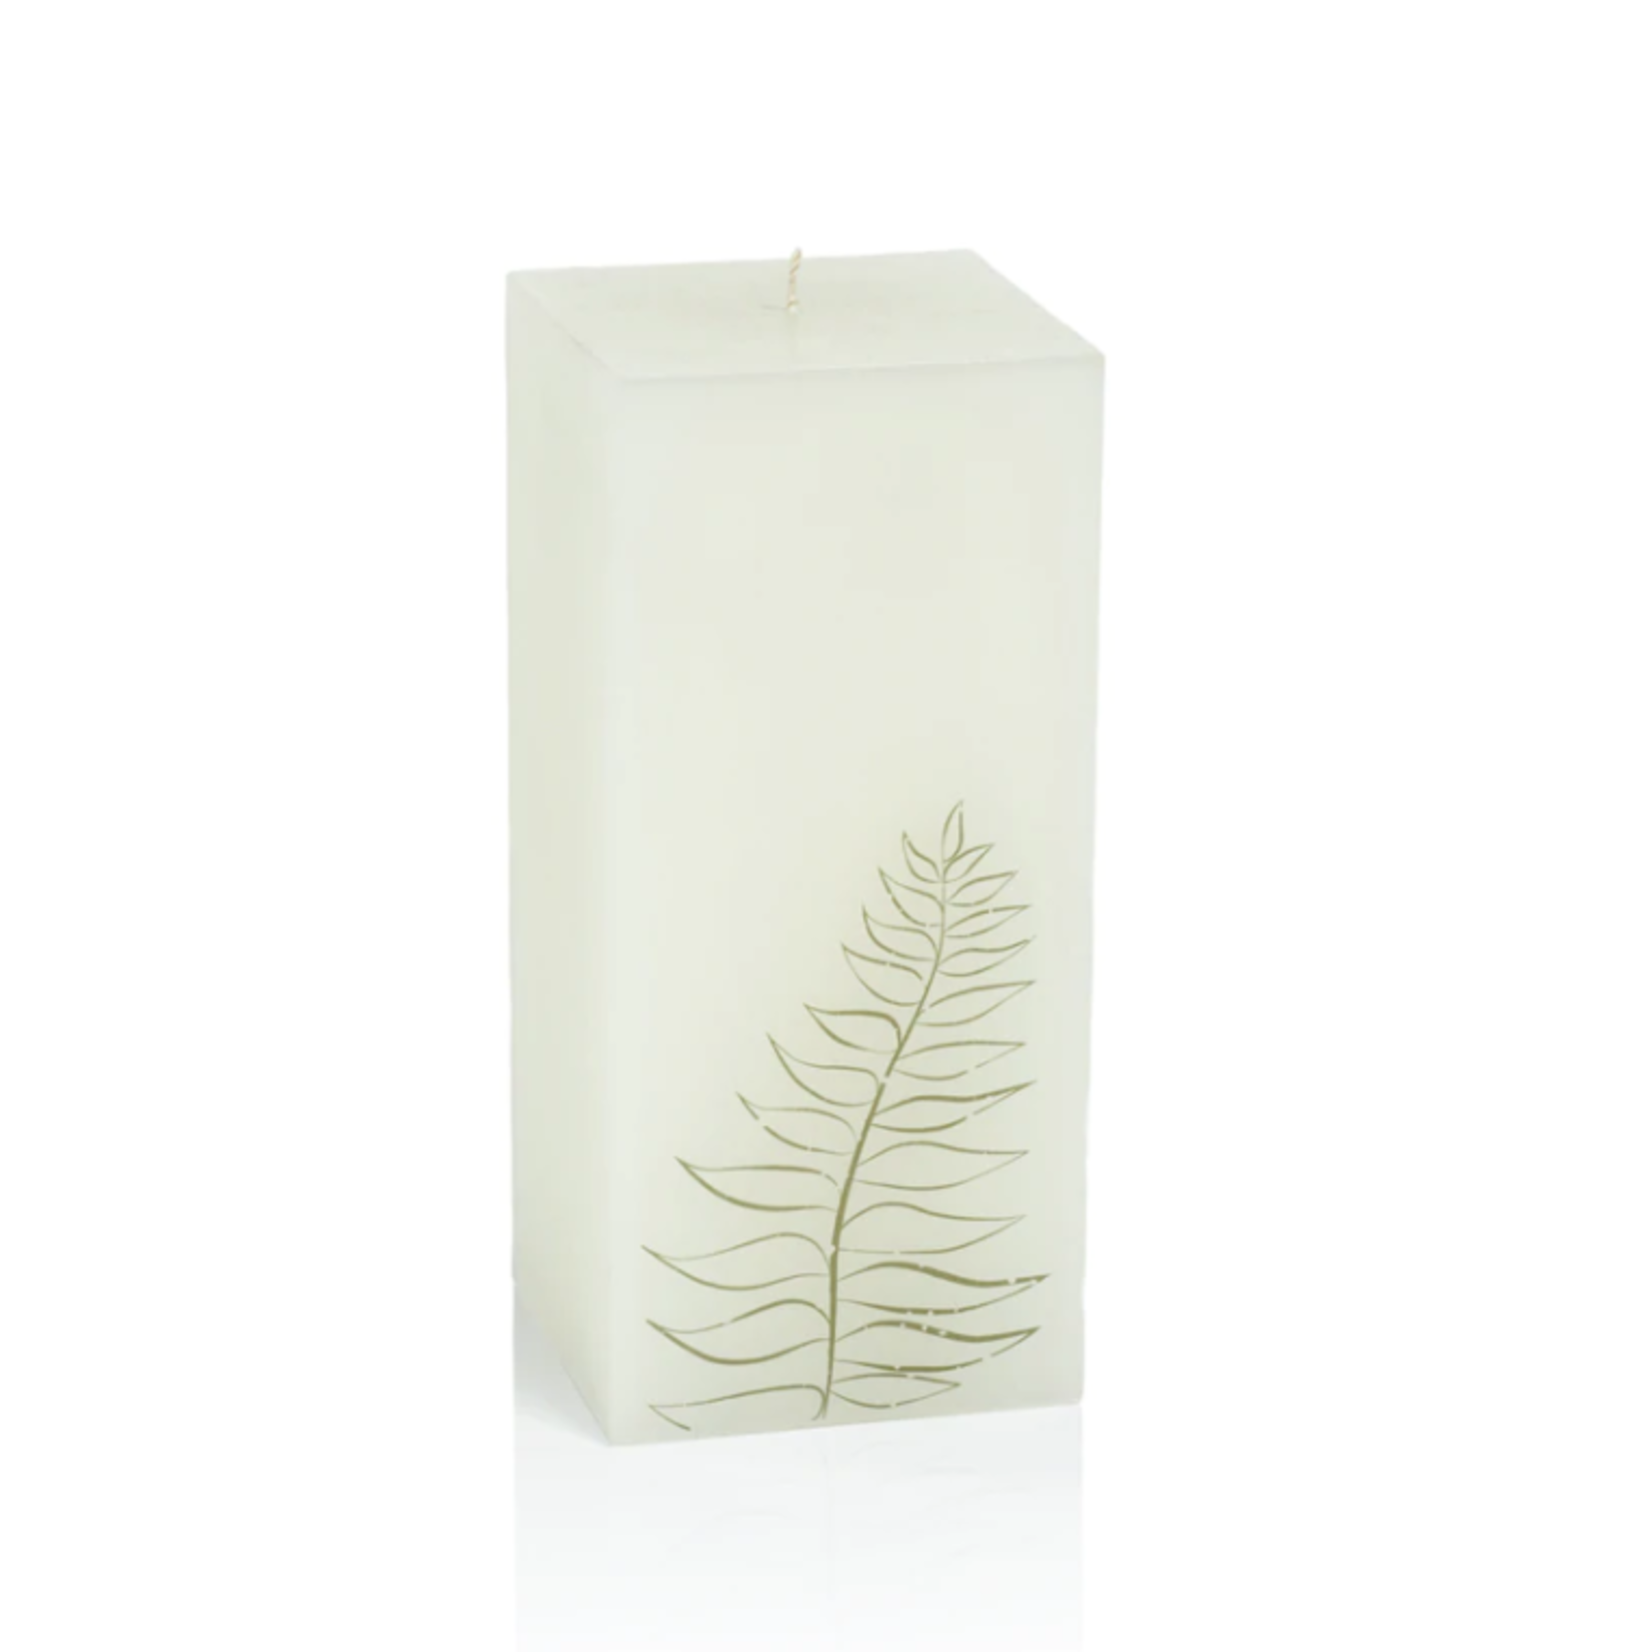 Zodax One Wick Pillar Candle